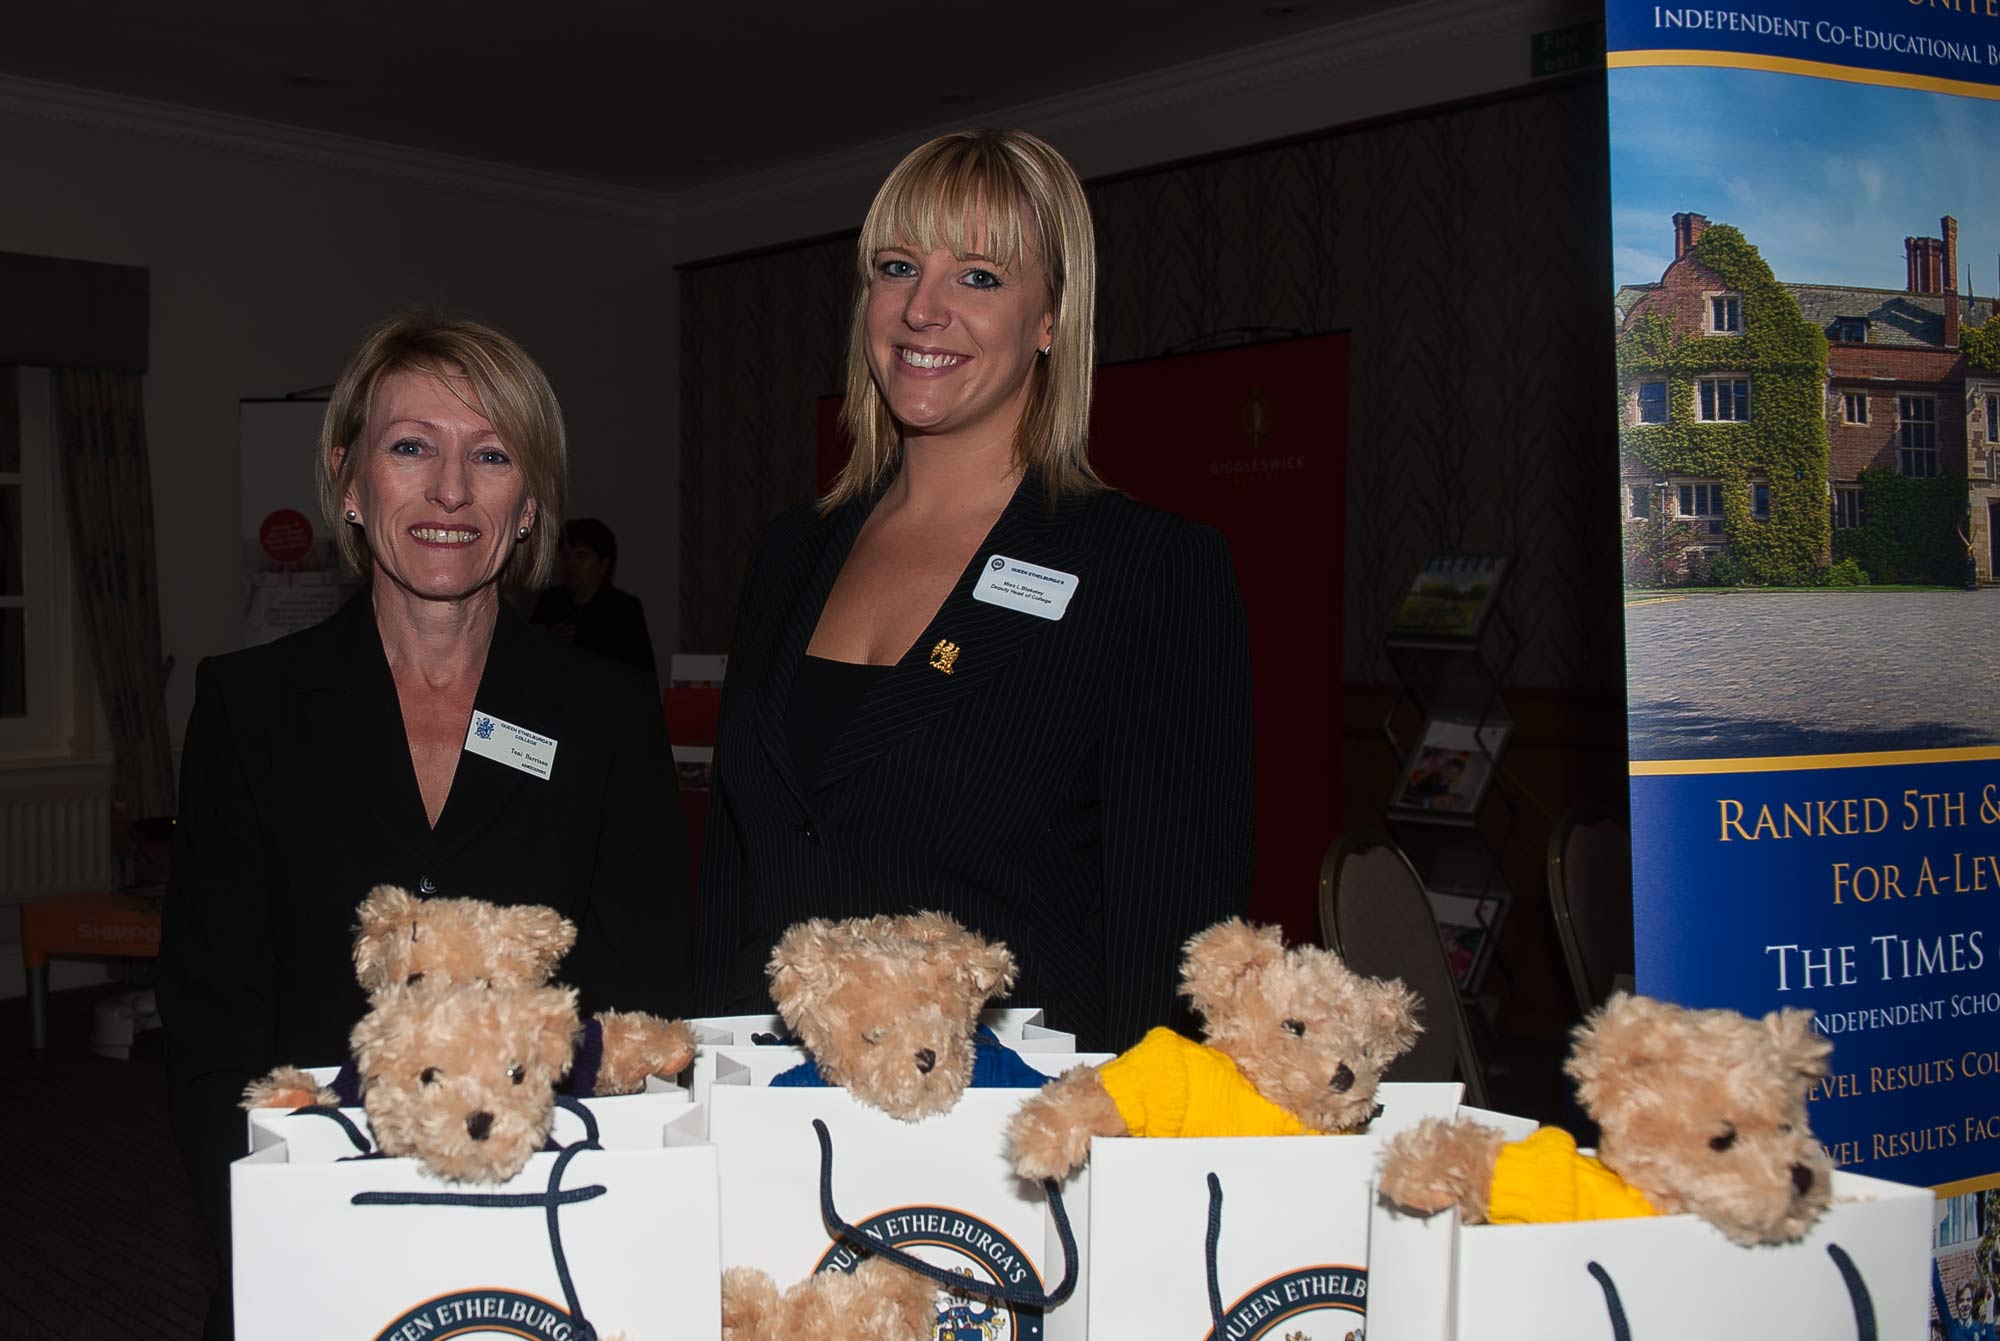 Toni Harrison, Admissions Manager and Lauren Blakeley, Deputy Head of College - Queen Ethelburga's